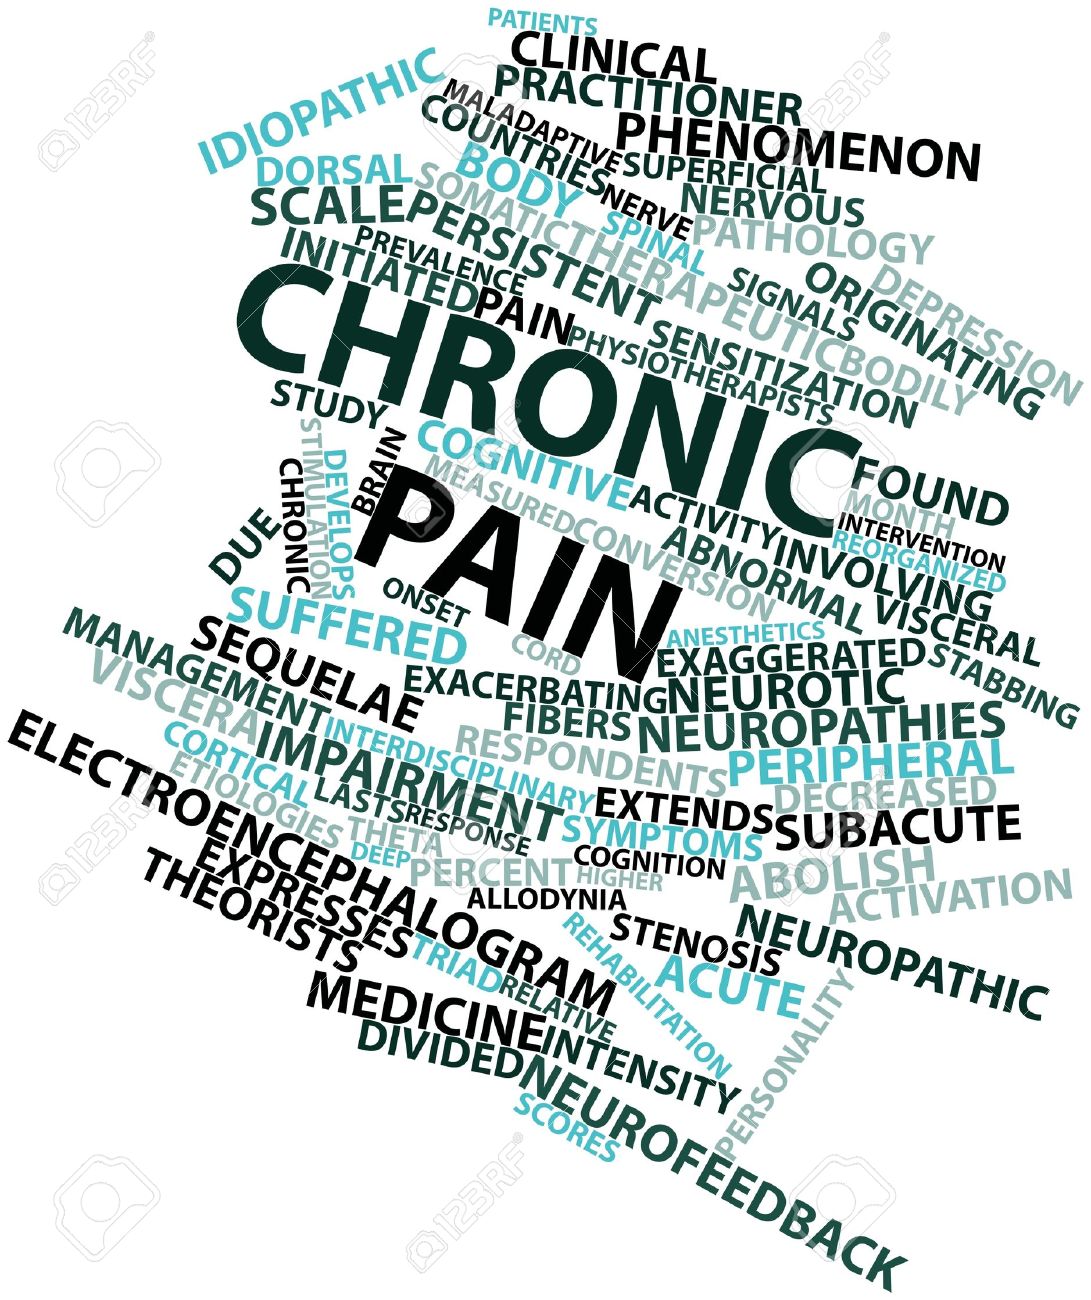 Infographic: Chronic PainAn Invisible Condition - PainScale